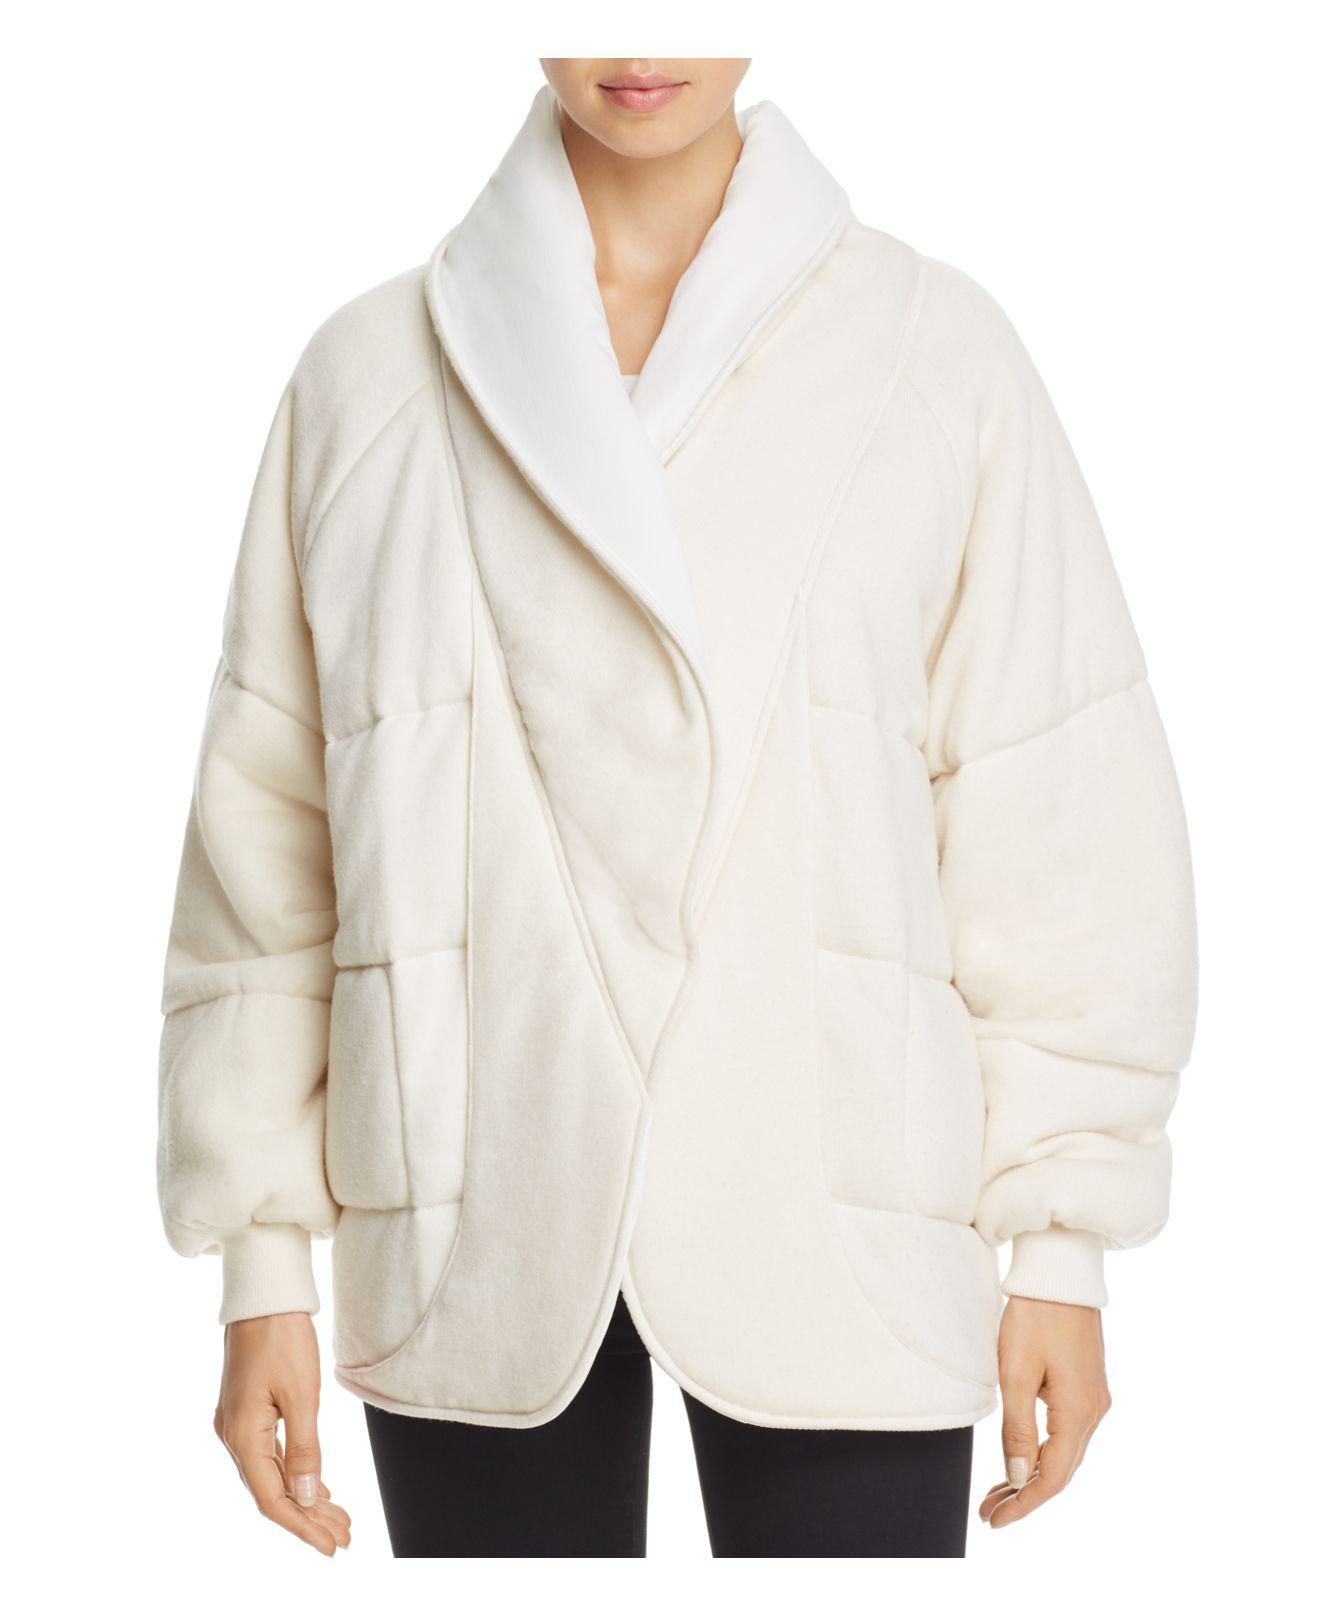 Donna Karan Quilted Wool Jacket in Ivory (White) - Lyst